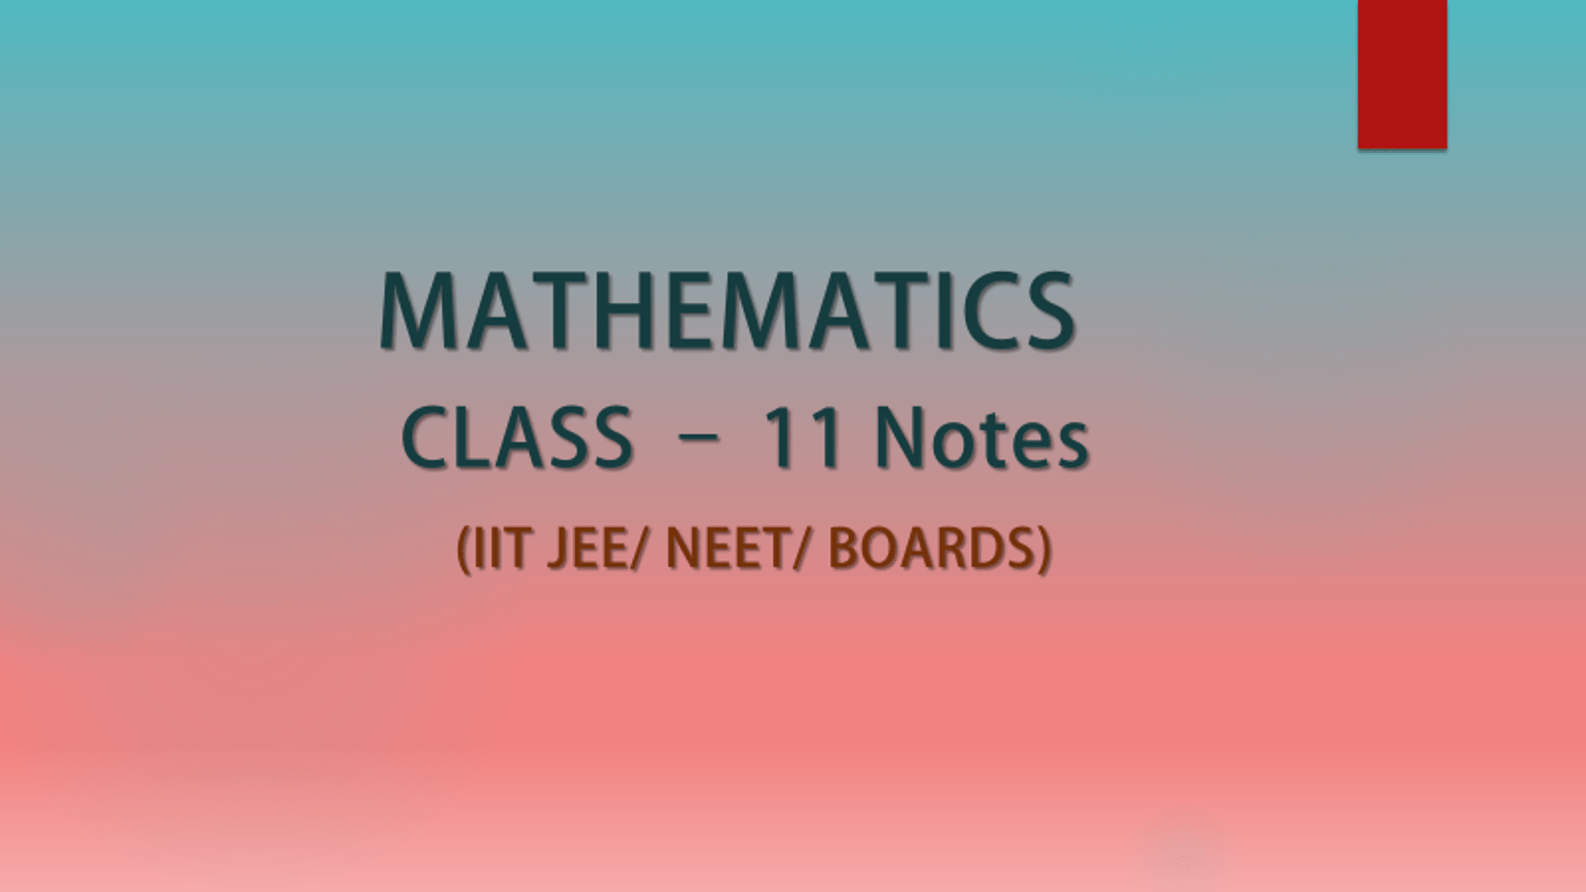 Chapter 1 - 16 Mathematics Notes for Class 11 & IIT JEE